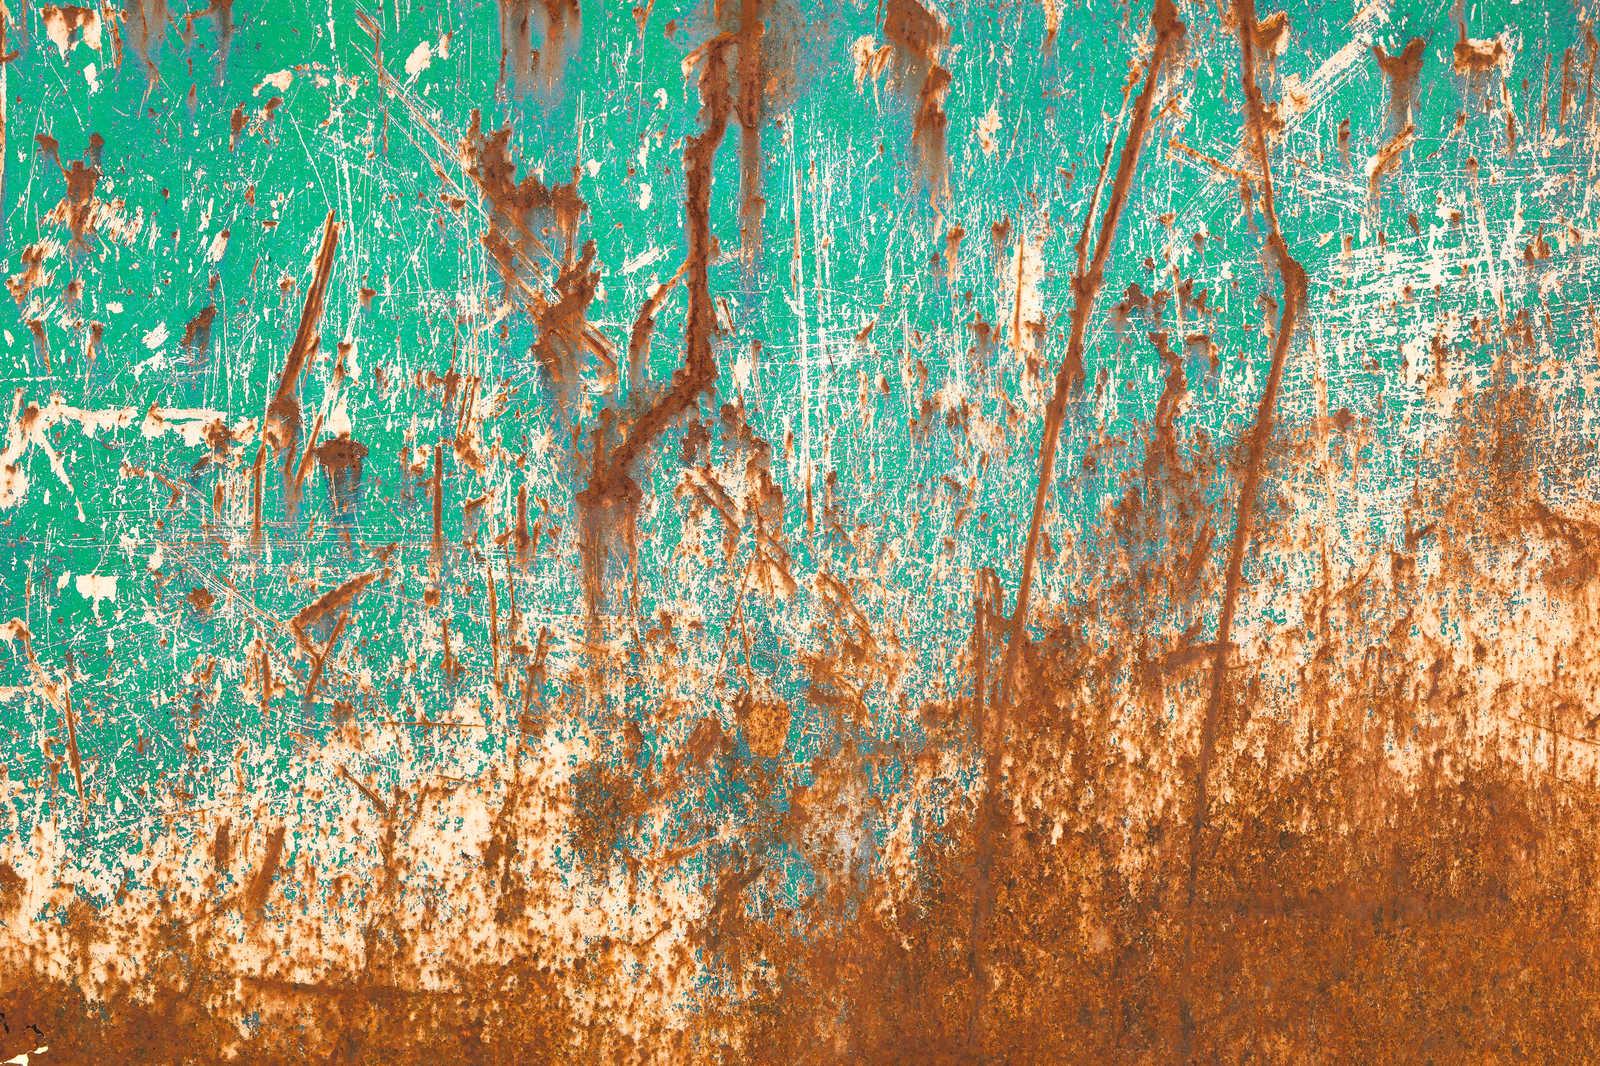             Metal Industrial Style Canvas Painting Rust Look - 0.90 m x 0.60 m
        